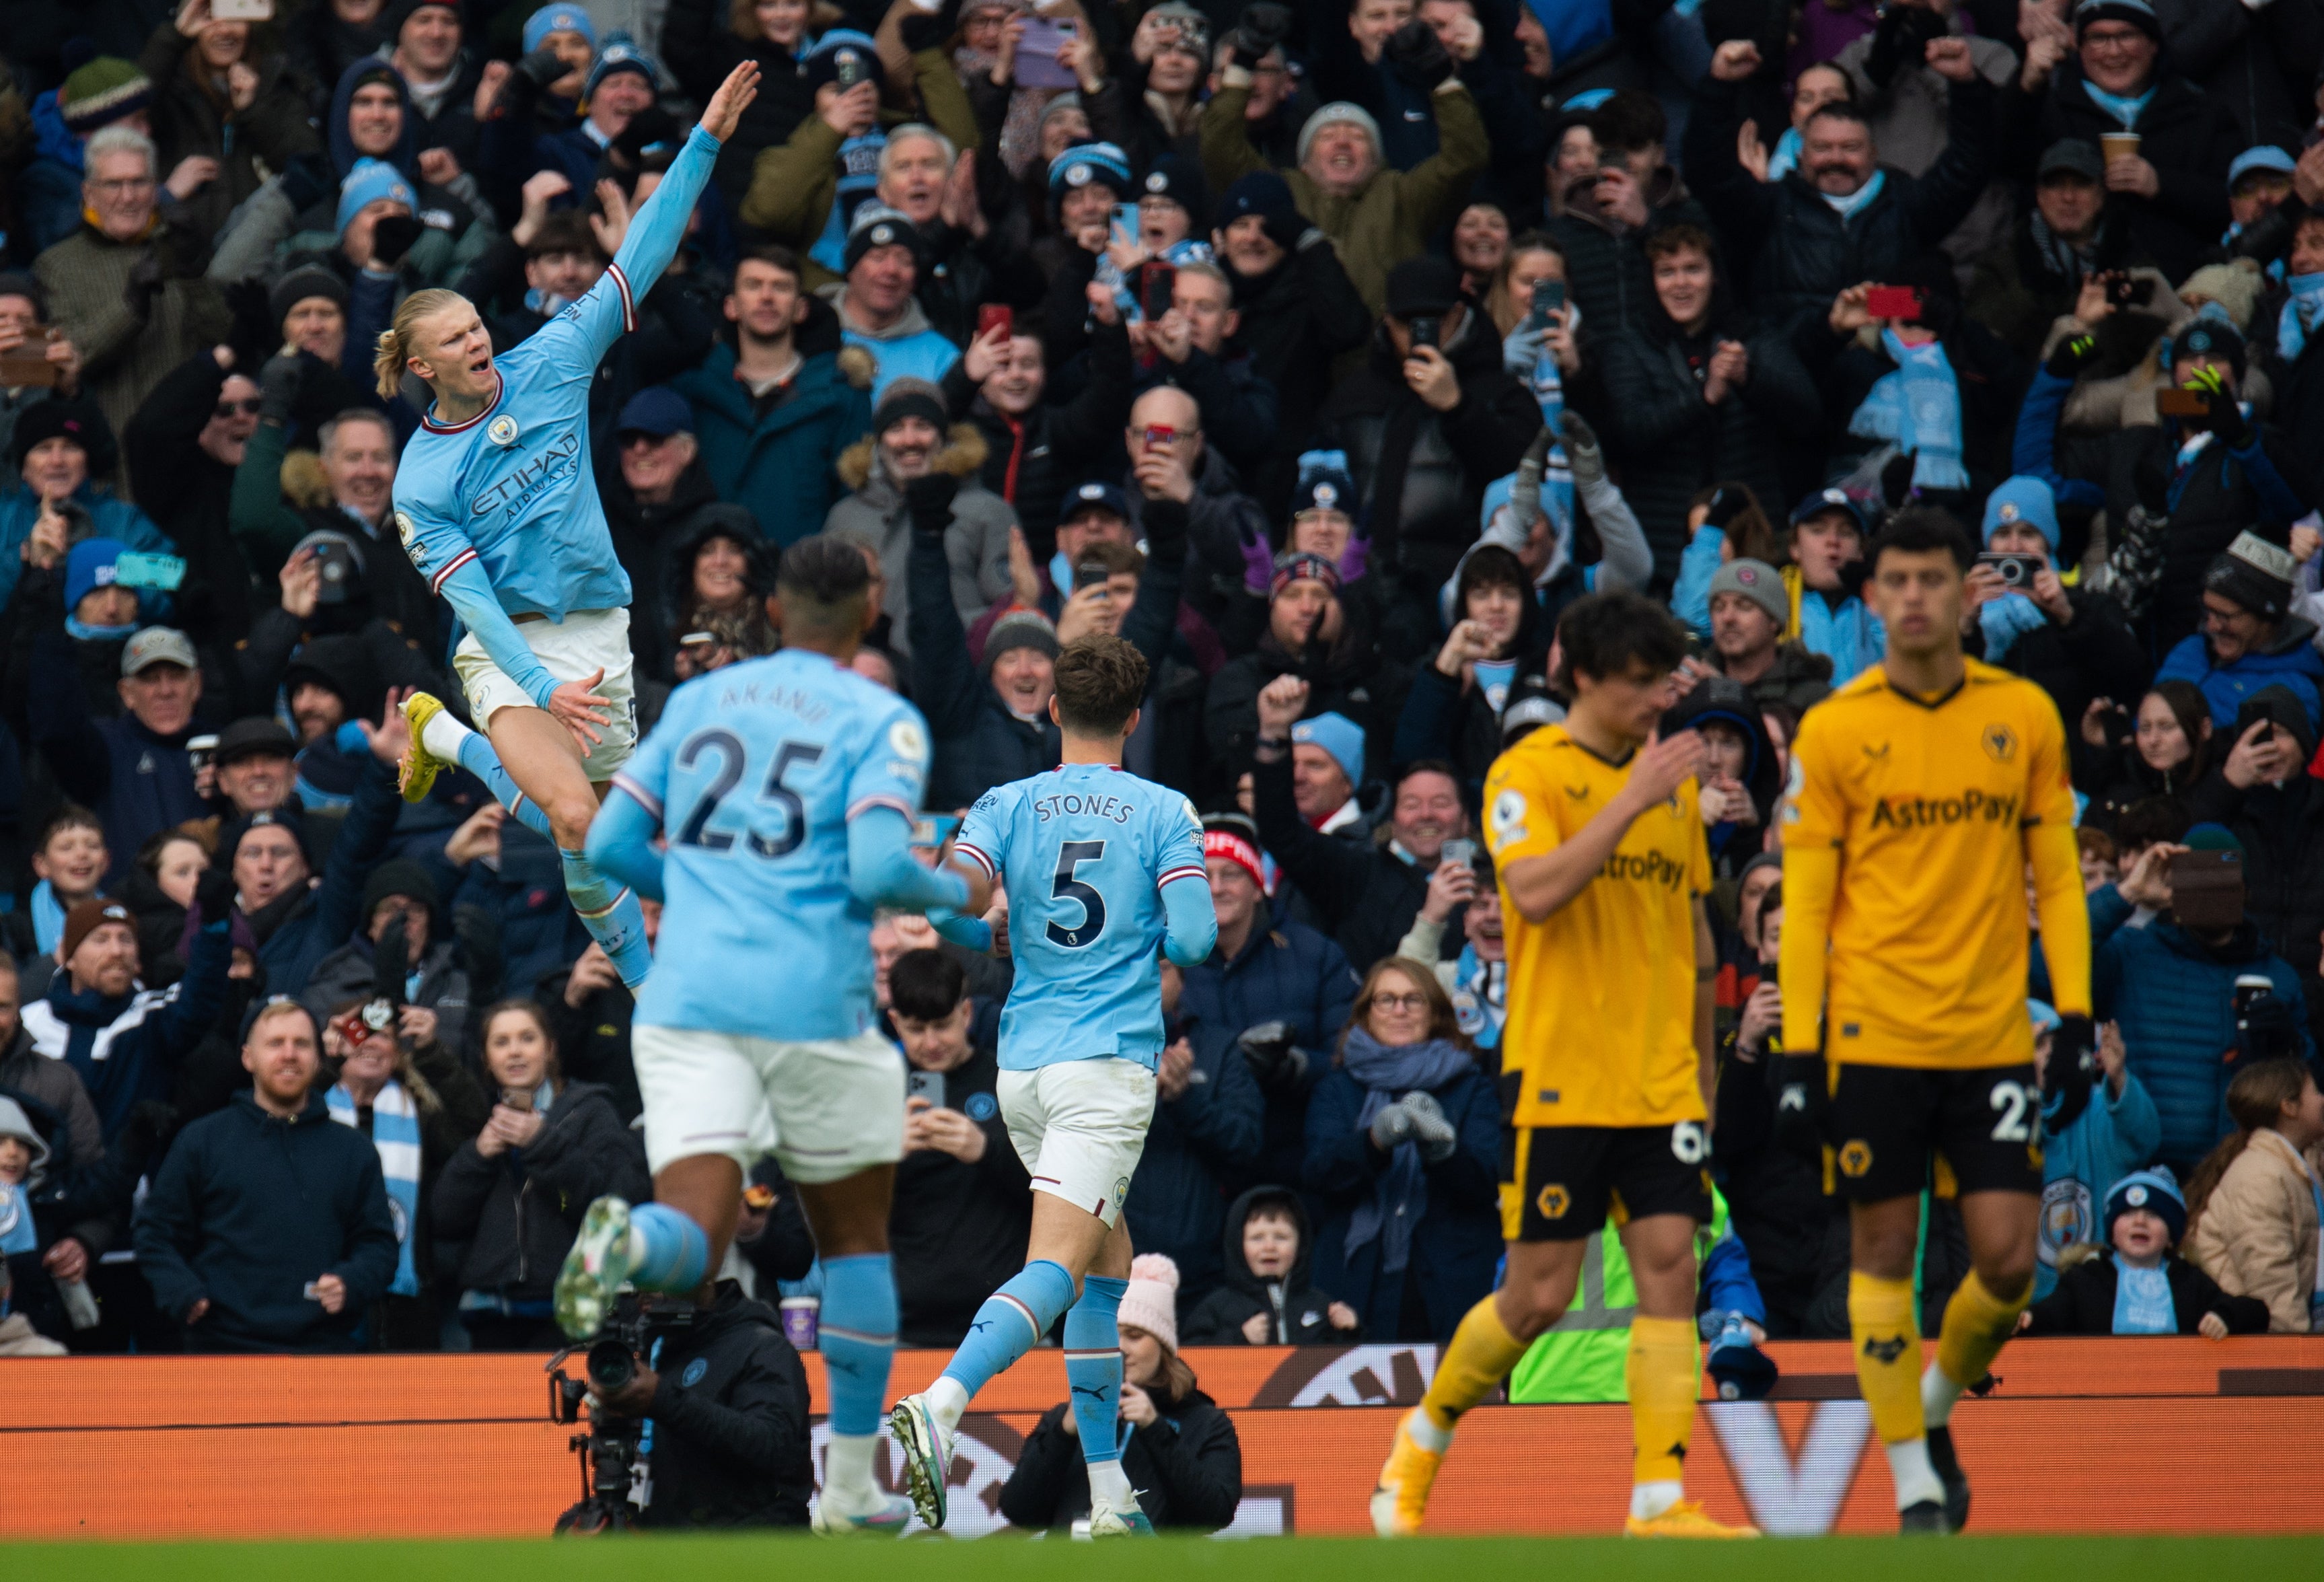 Haaland celebrates after scoring his second goal for Man City against Wolves at the Etihad